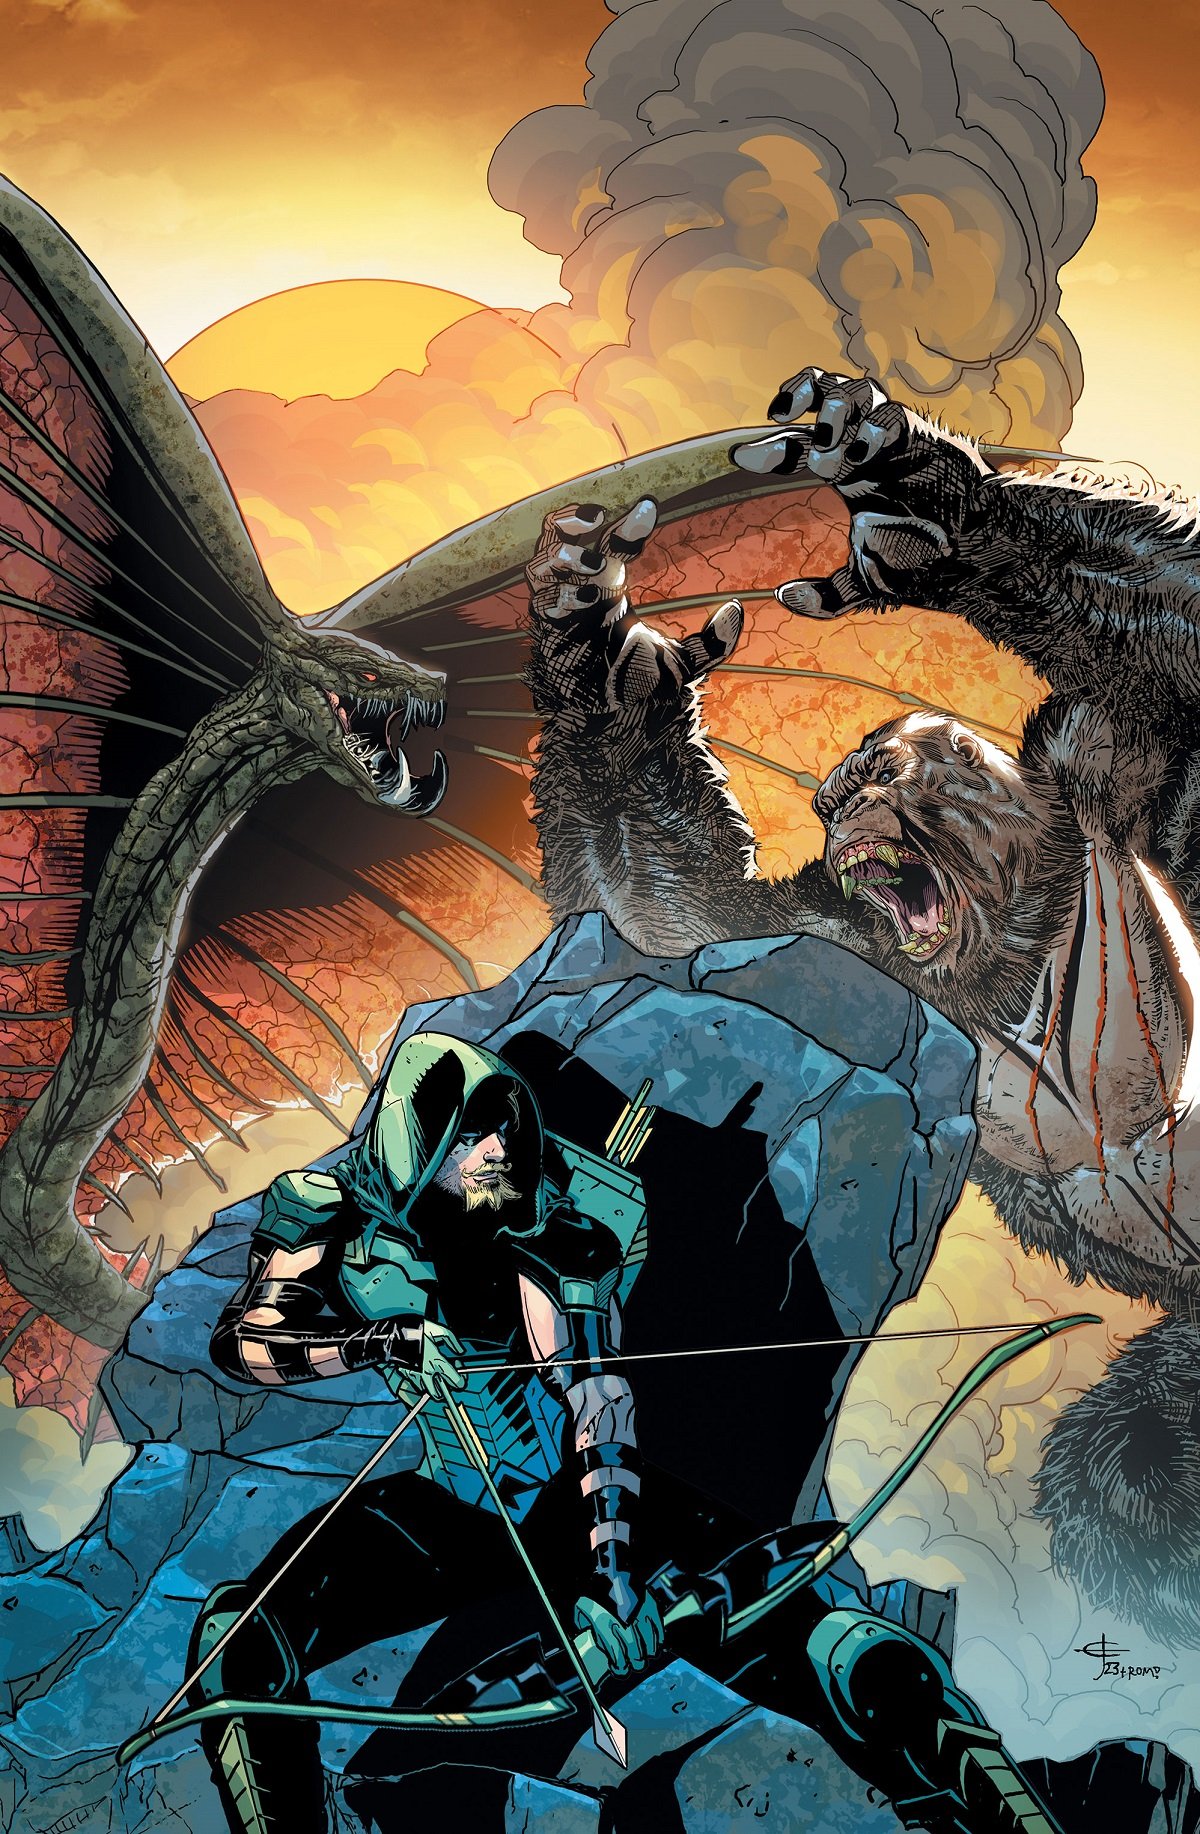 Green Arrow vs. Kong and other monsters, in the cover for Justice League vs. Godzilla vs. Kong #3